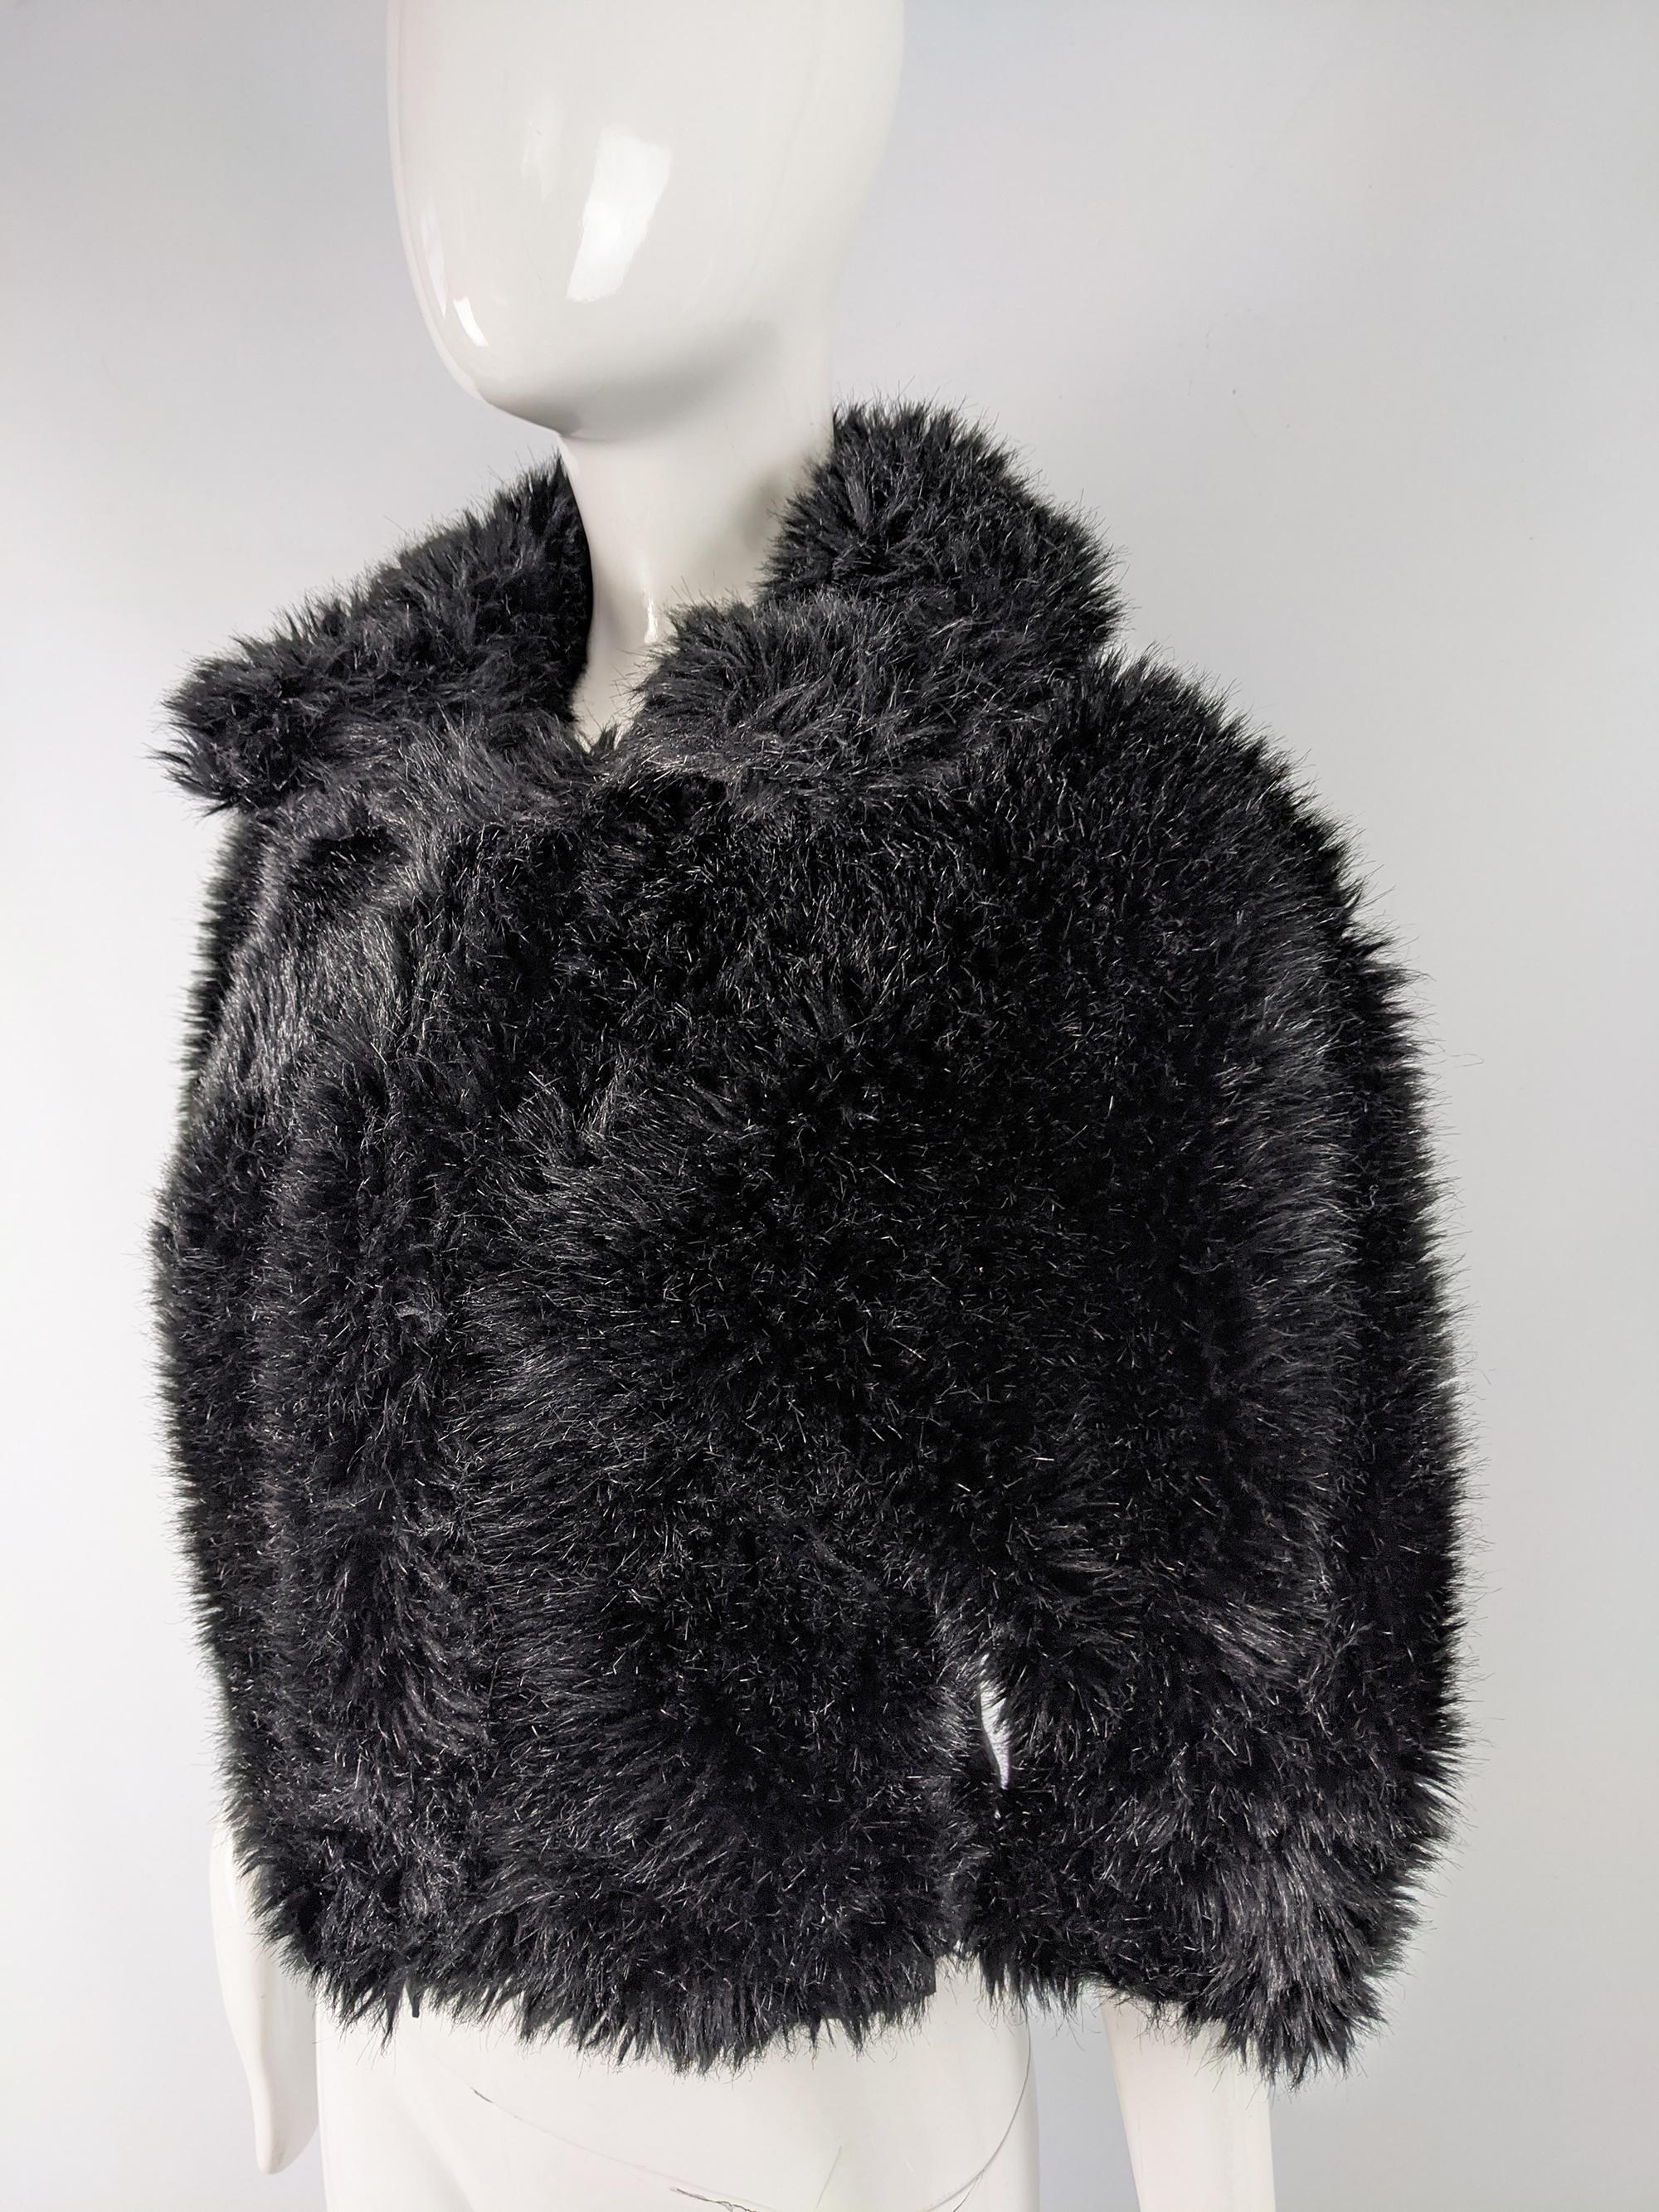 Nina Ricci Faux Fur Wool & Cashmere Jacket In Excellent Condition In Doncaster, South Yorkshire